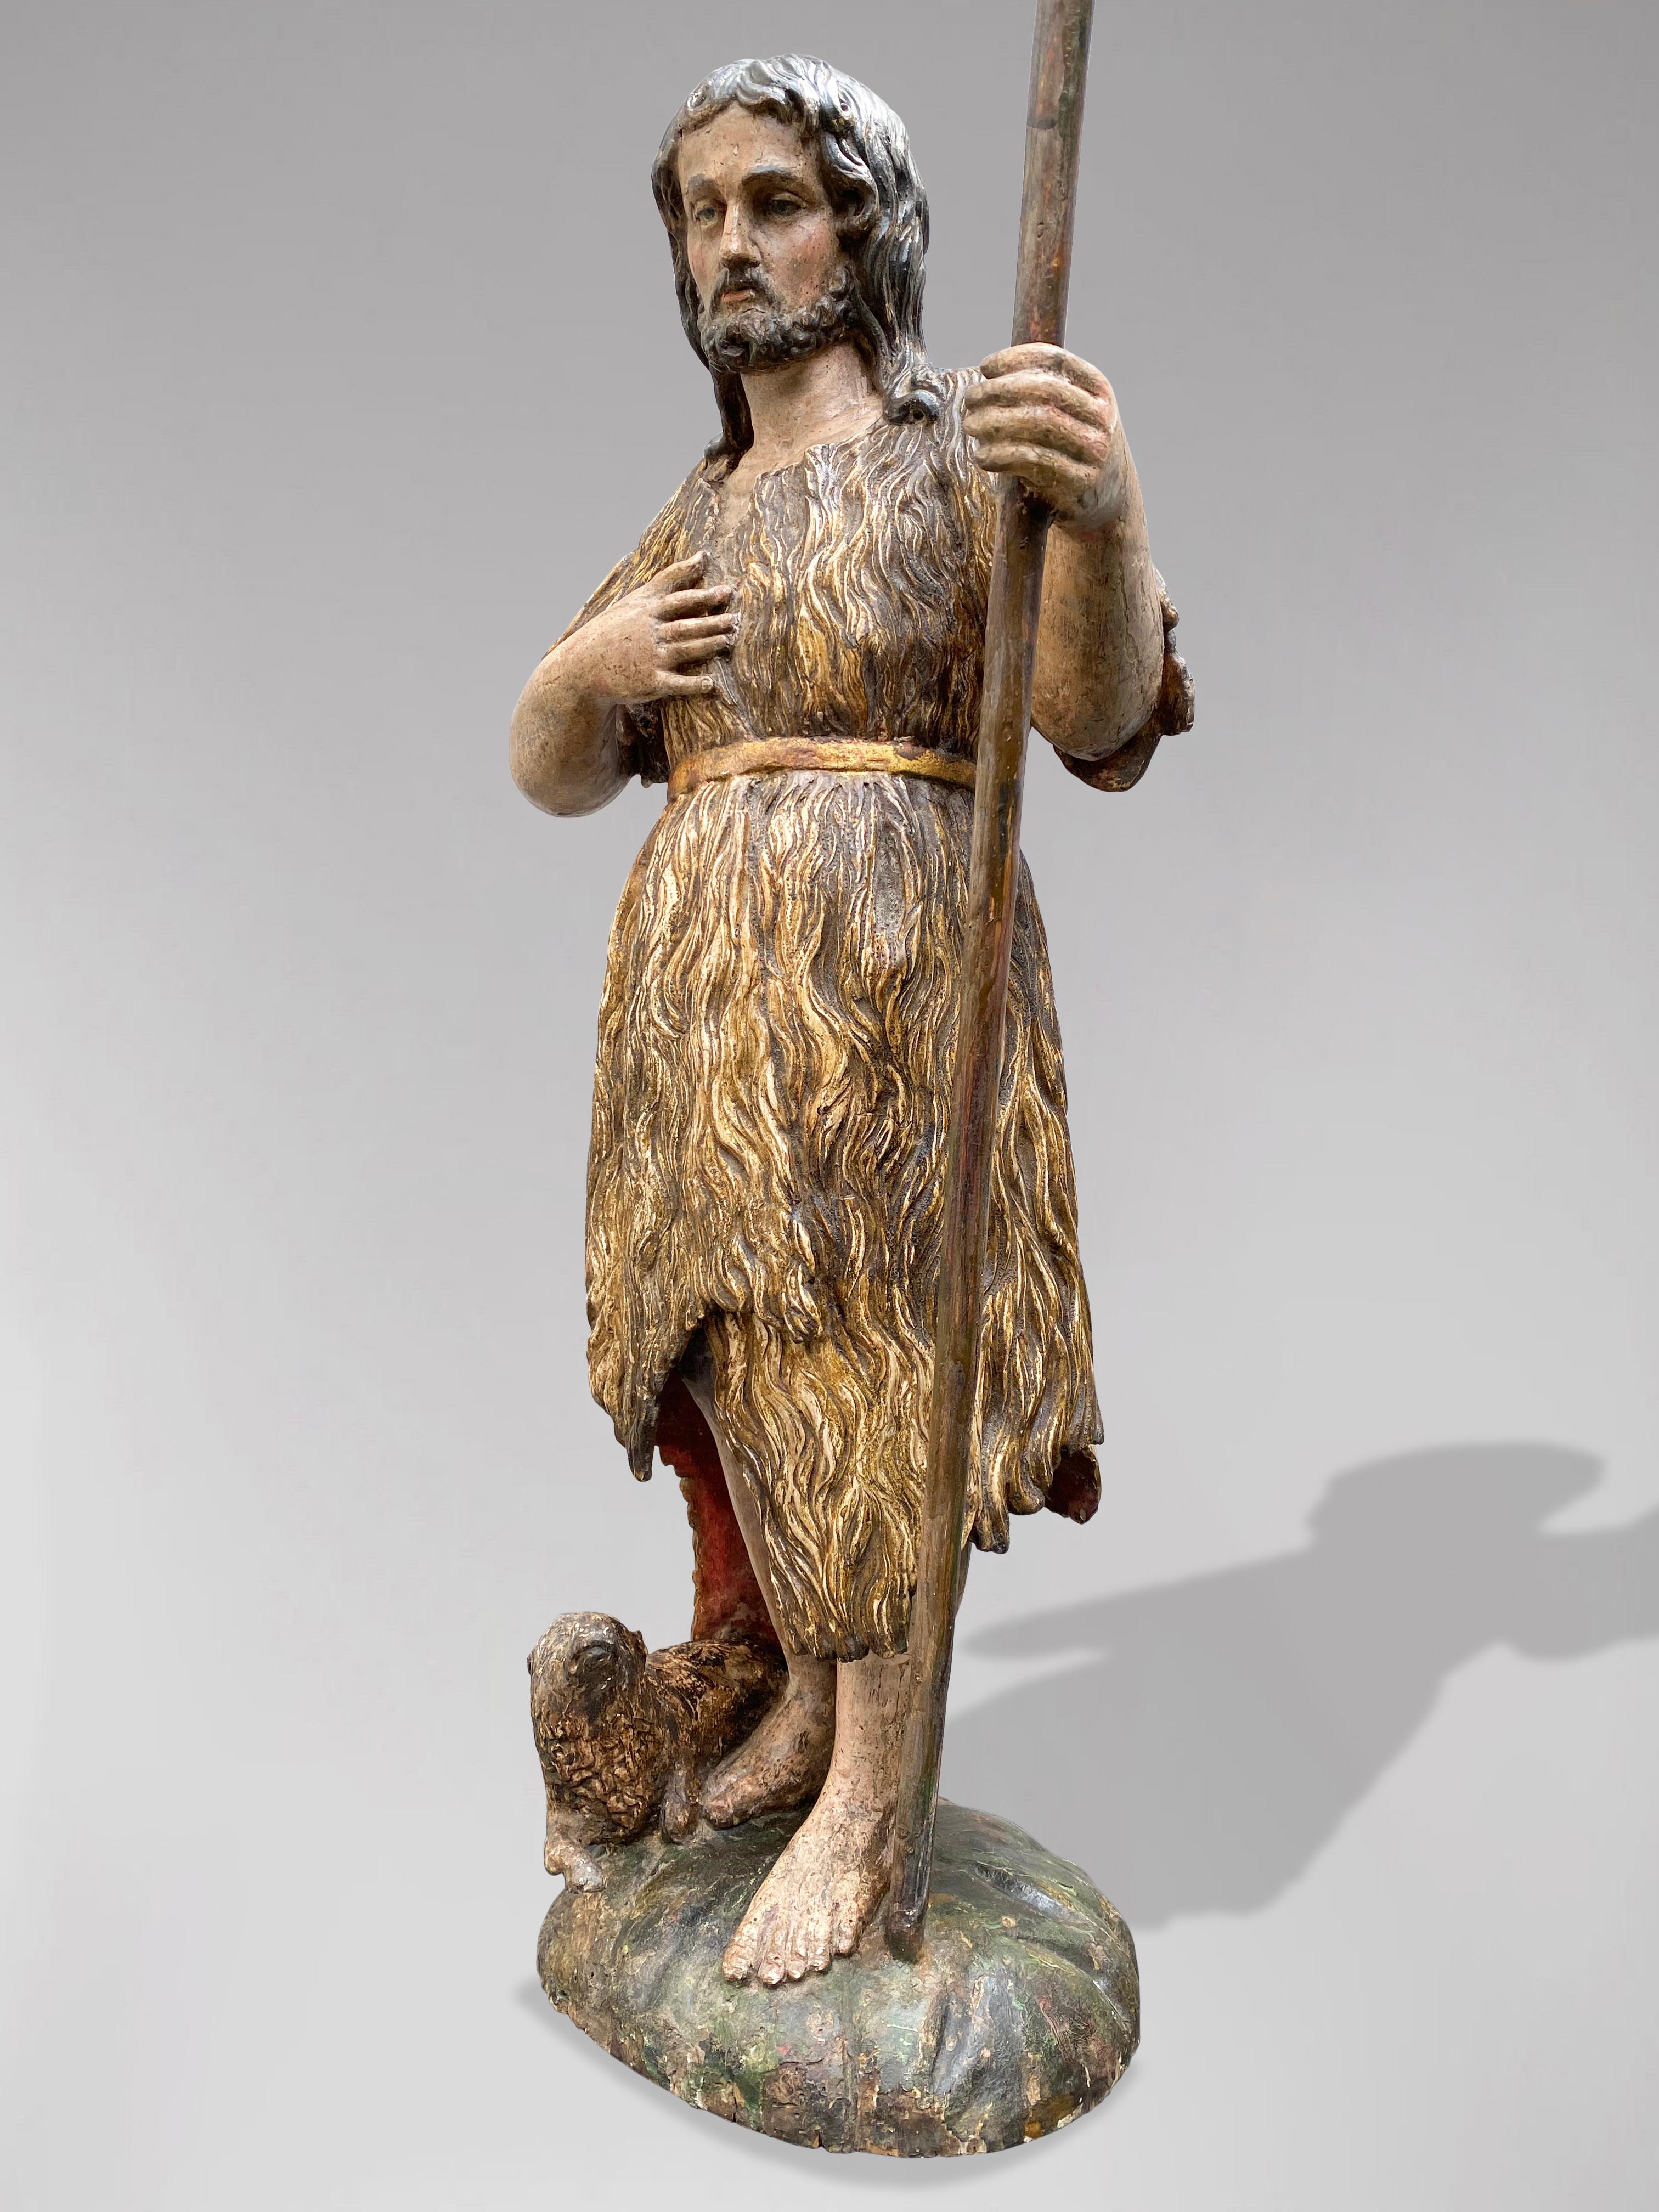 A French Statue of Saint John the Baptist, Circa 1700, polychromed wood - Sculpture by Unknown